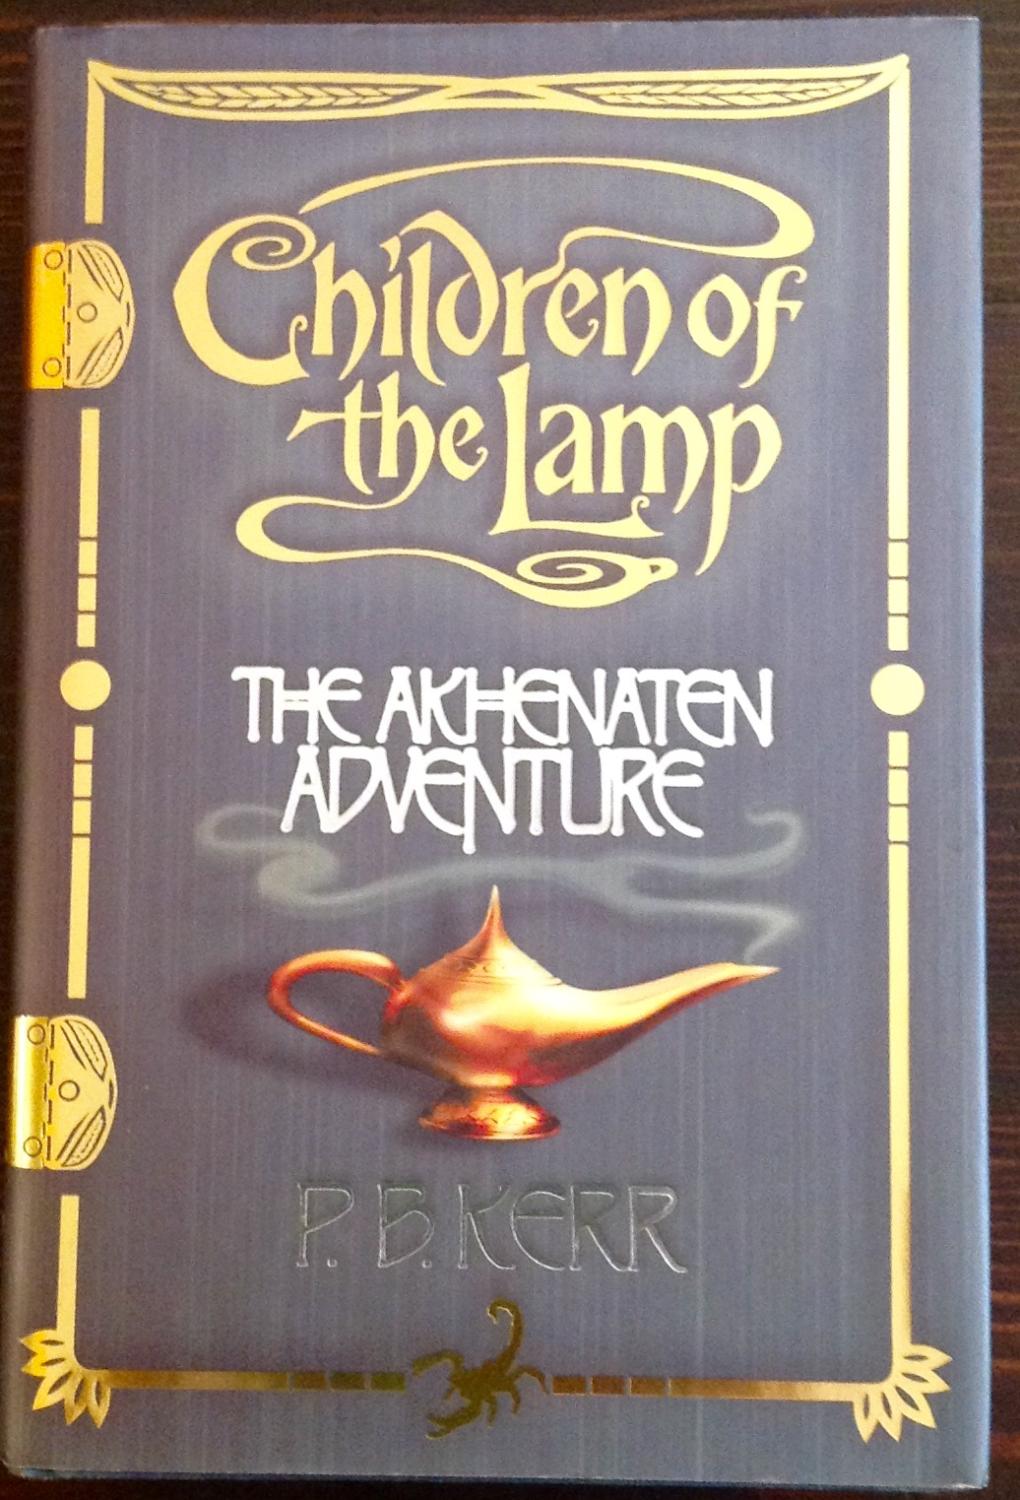 Children of Lamp: The Akhenaten Adventure by Kerr, P.B.: Very Good Hardcover (2004) 1st Edition, by Author(s) | The Poet's Pulpit